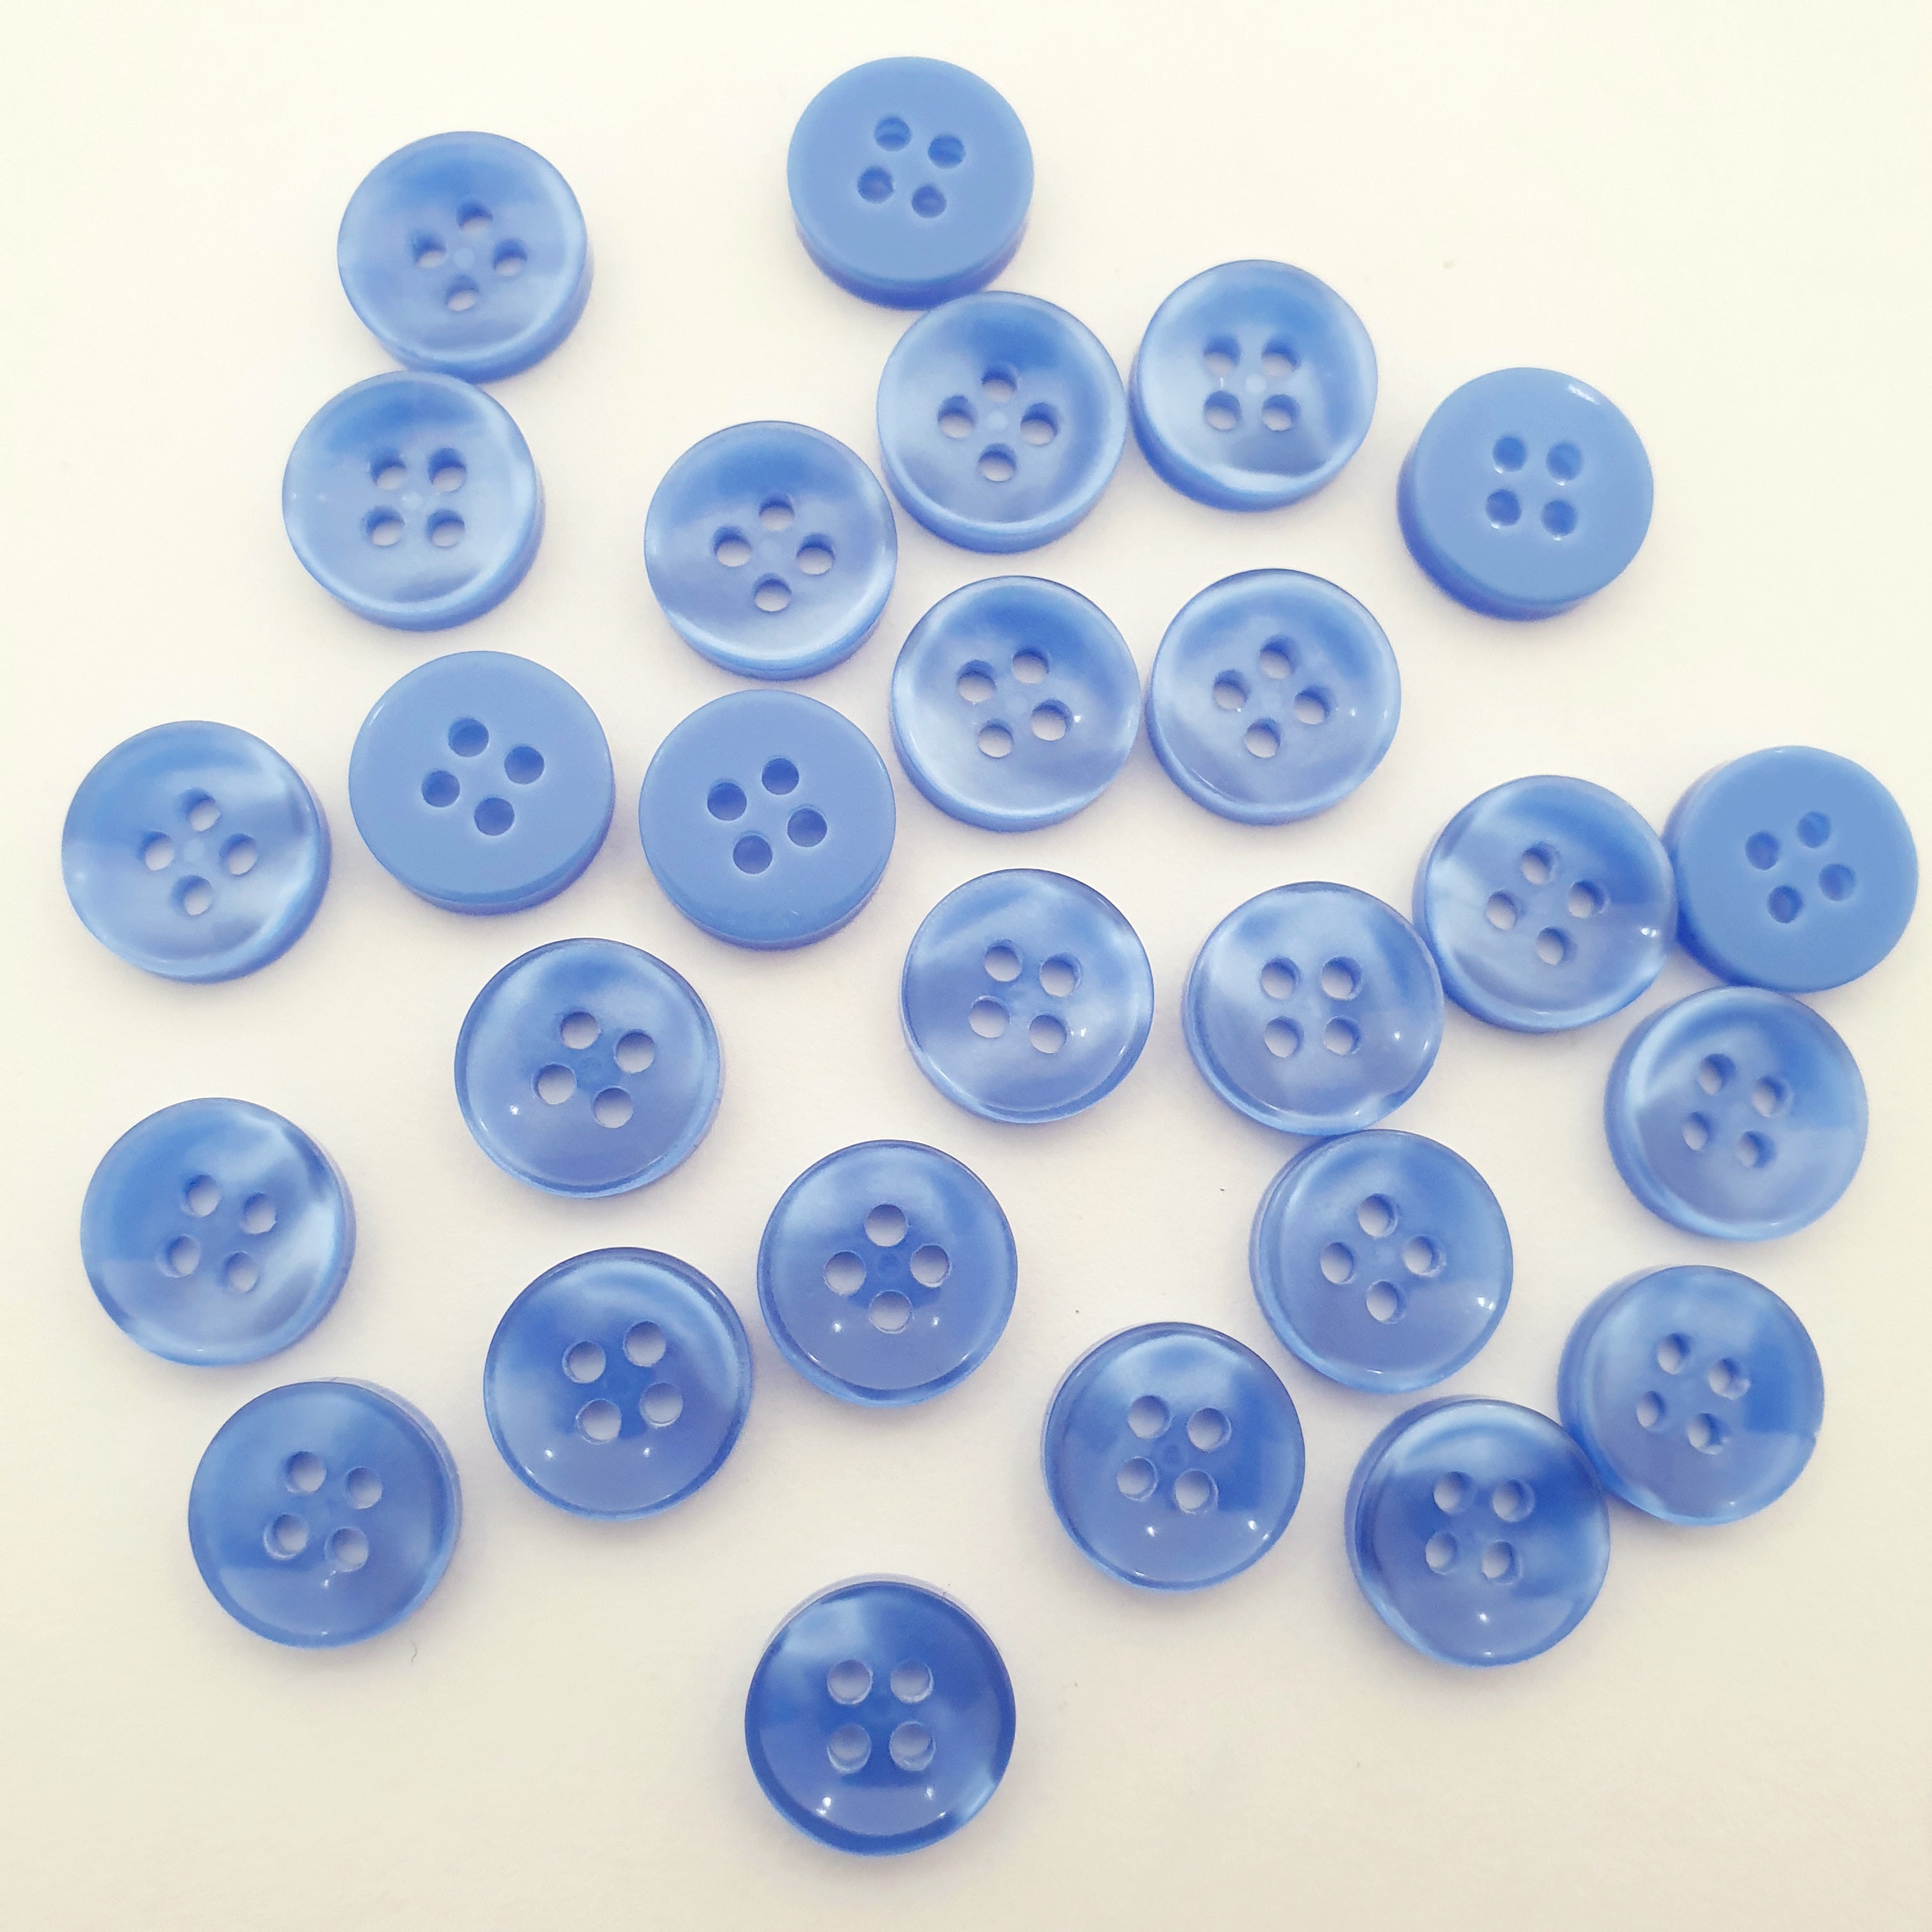 MajorCrafts 80pcs 11.5mm Sky Blue Pearlescent 4 Holes High-Grade Round Resin Small Sewing Buttons